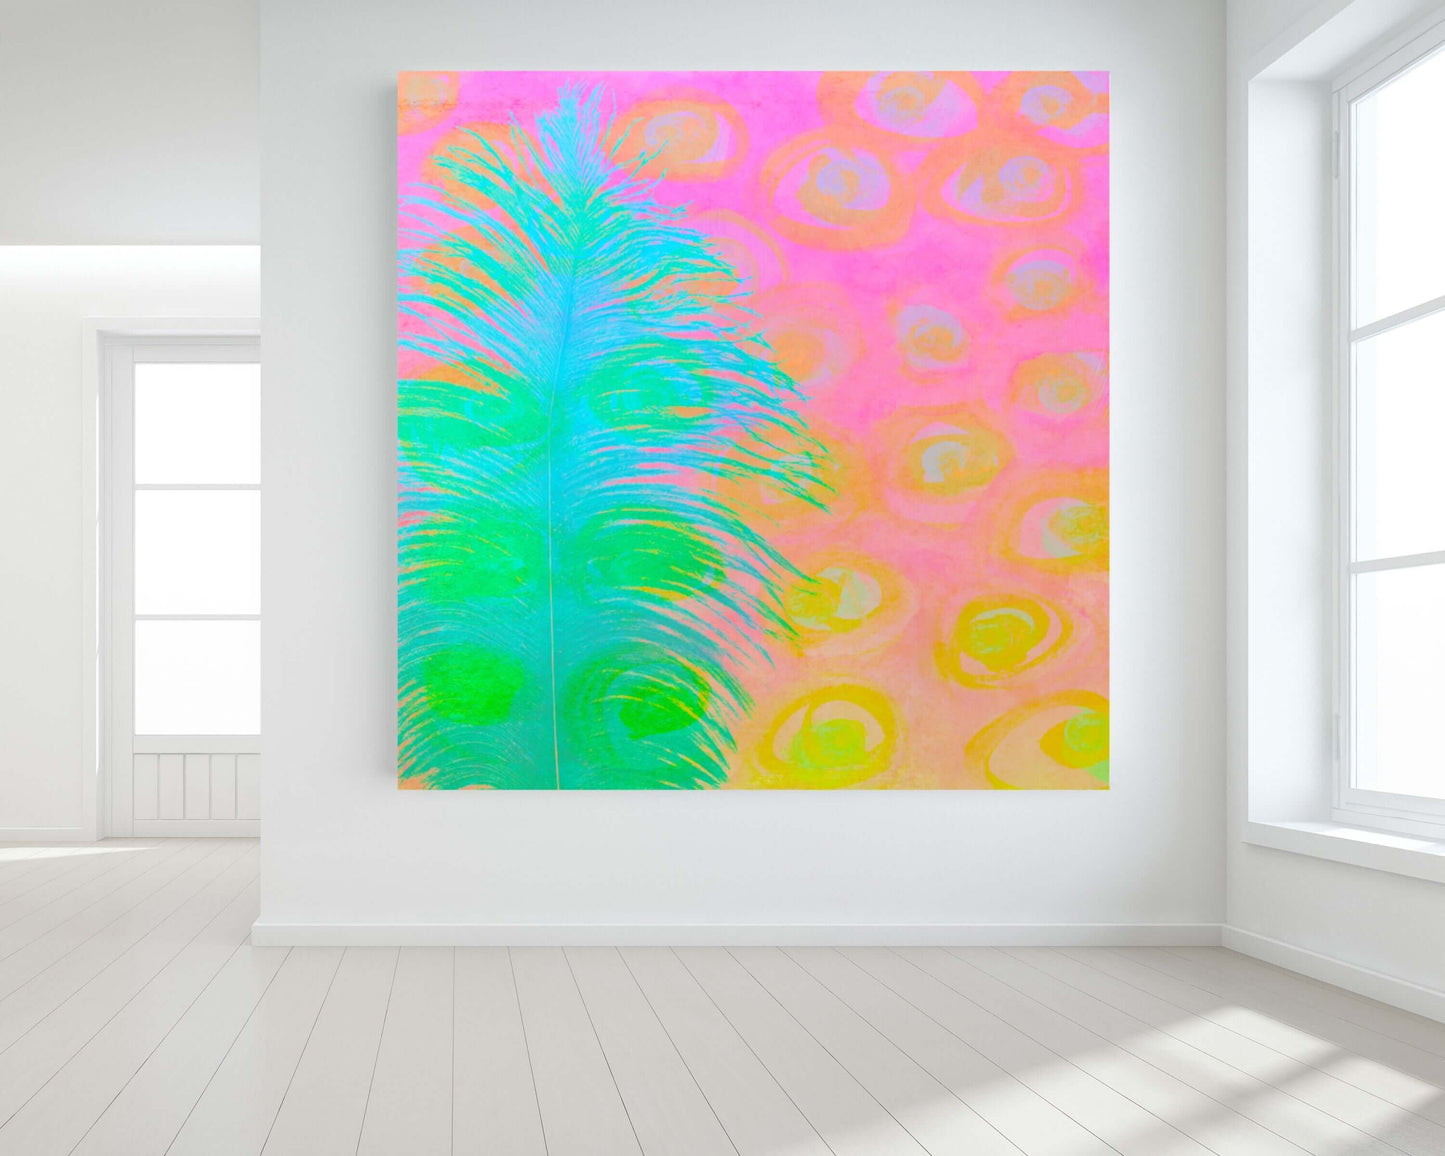 Bright Blue-Green Ostrich Feather on Pink and Yellow Background “My Other Half” Abstract Art Canvas Print Wall Art Large Canvas on Wall